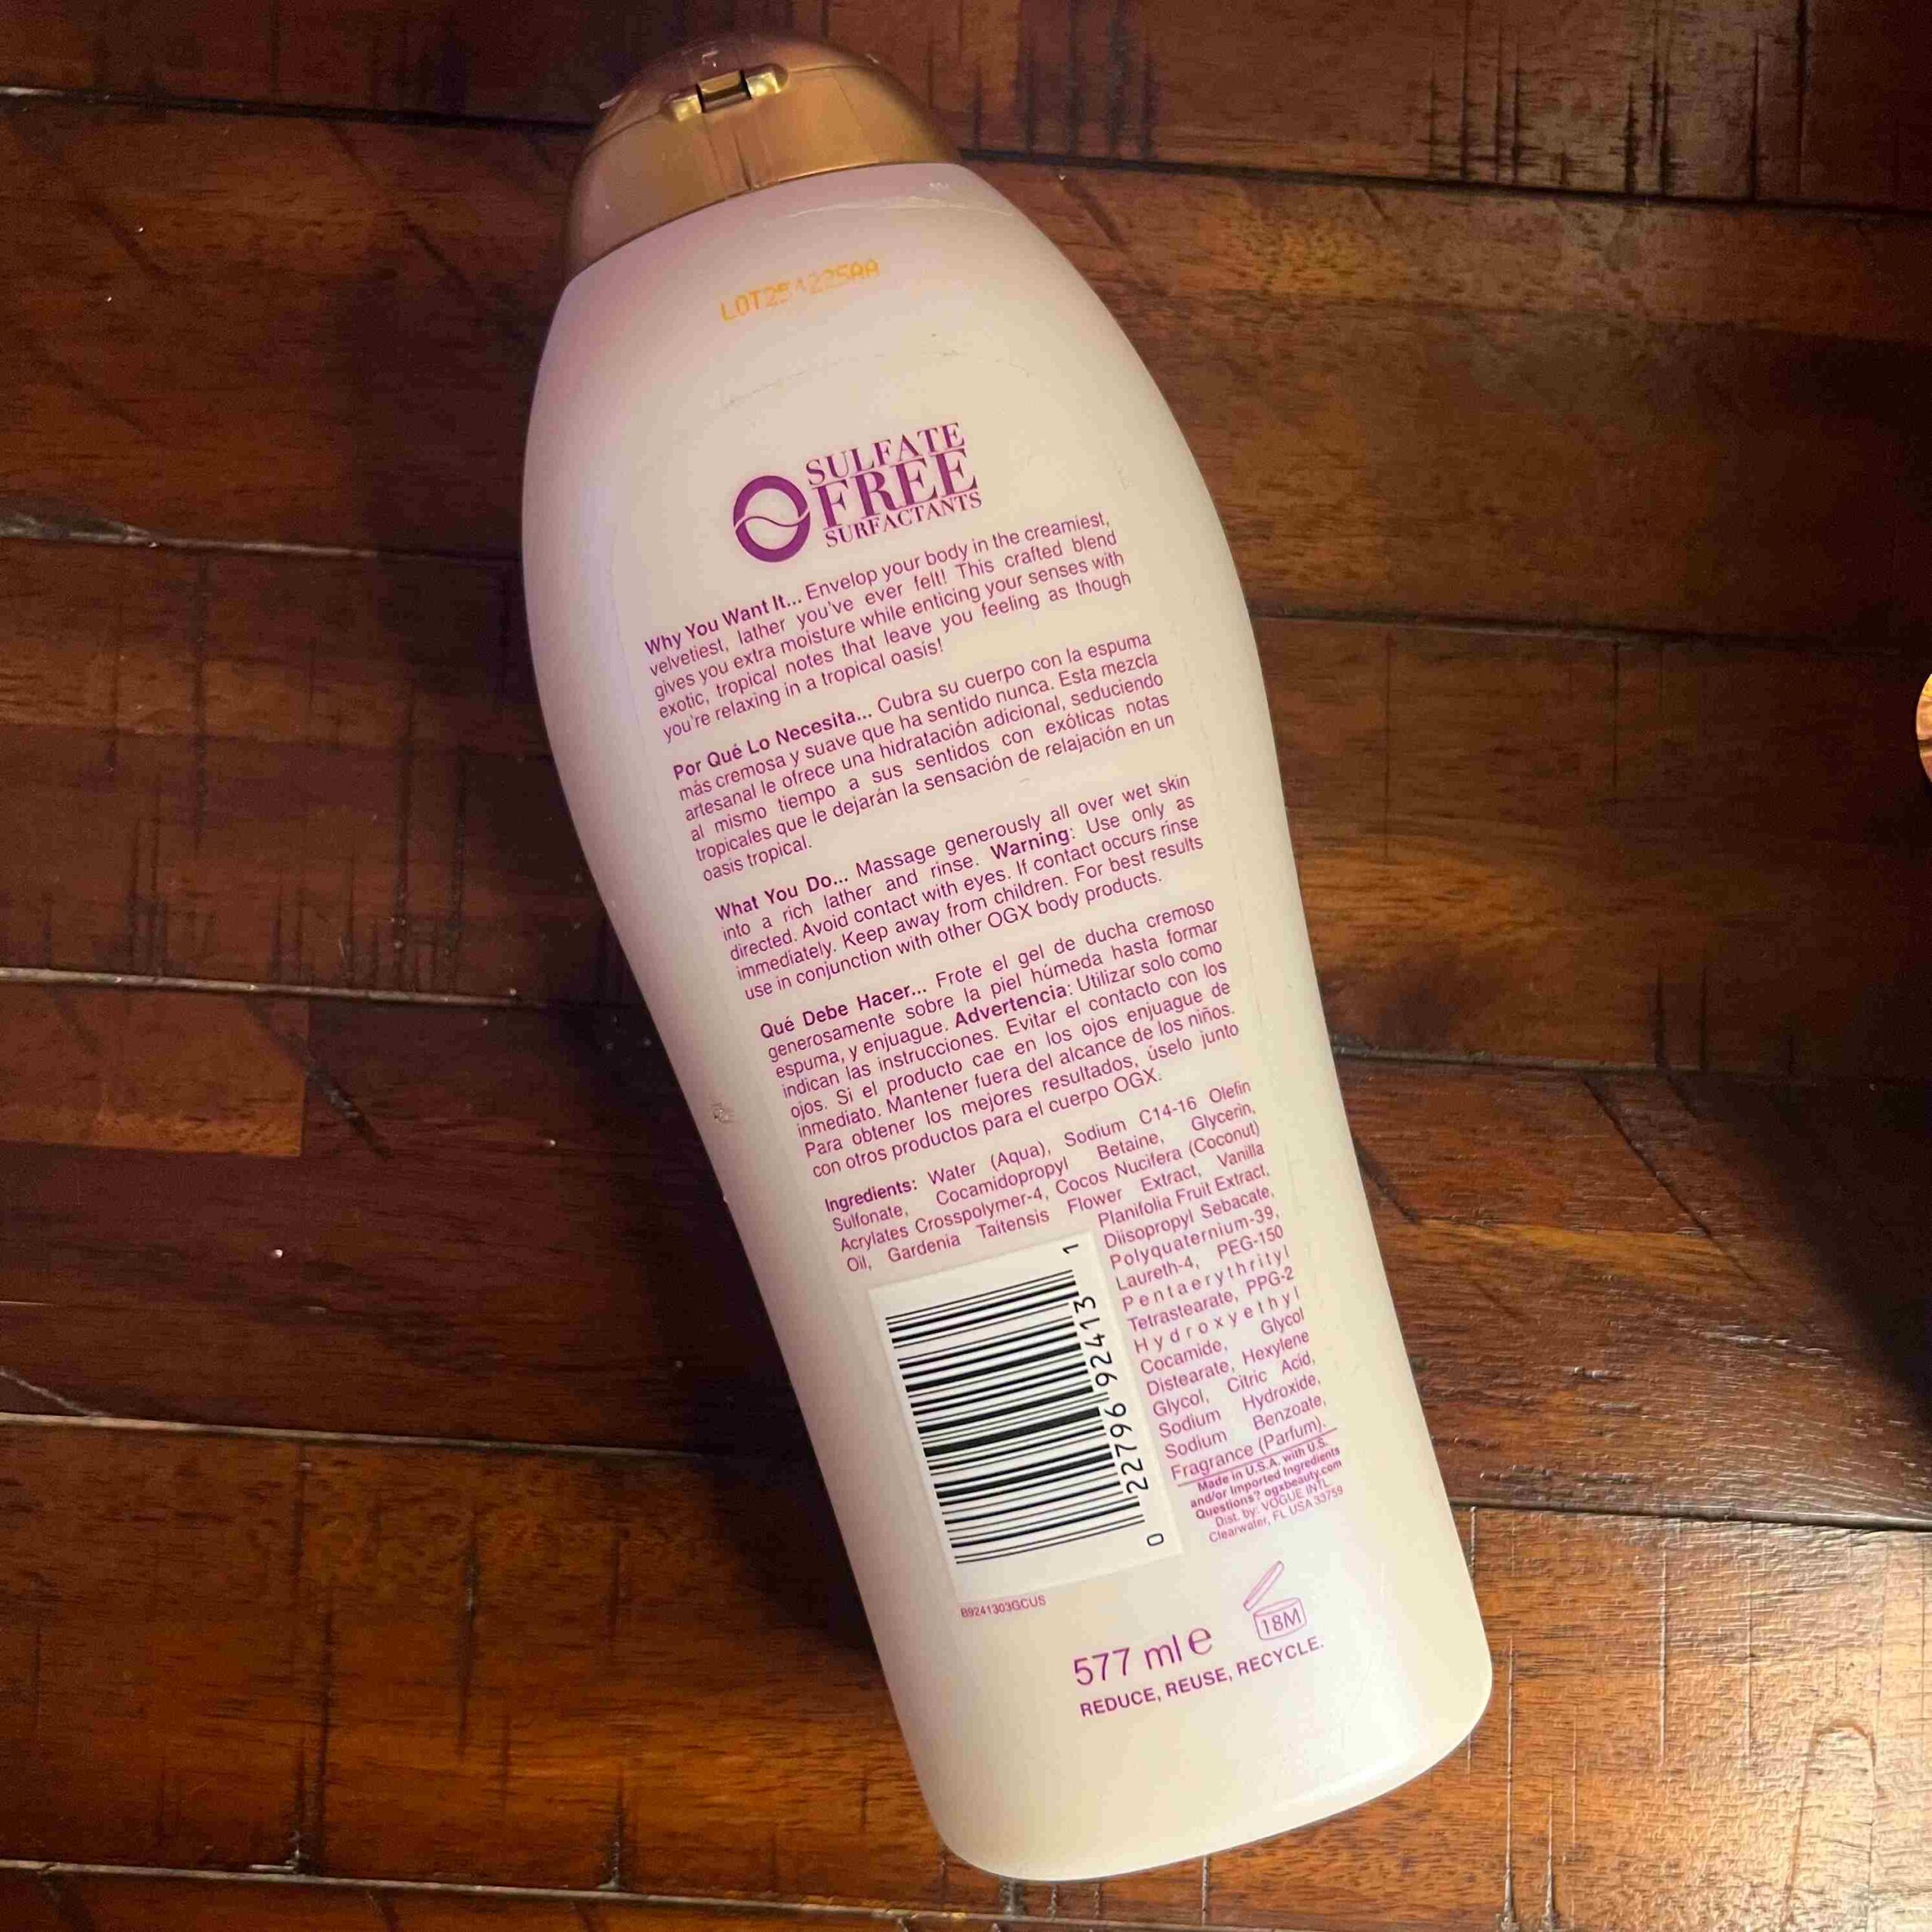 OGX Extra Creamy + Coconut Miracle Oil Body Wash 577ml